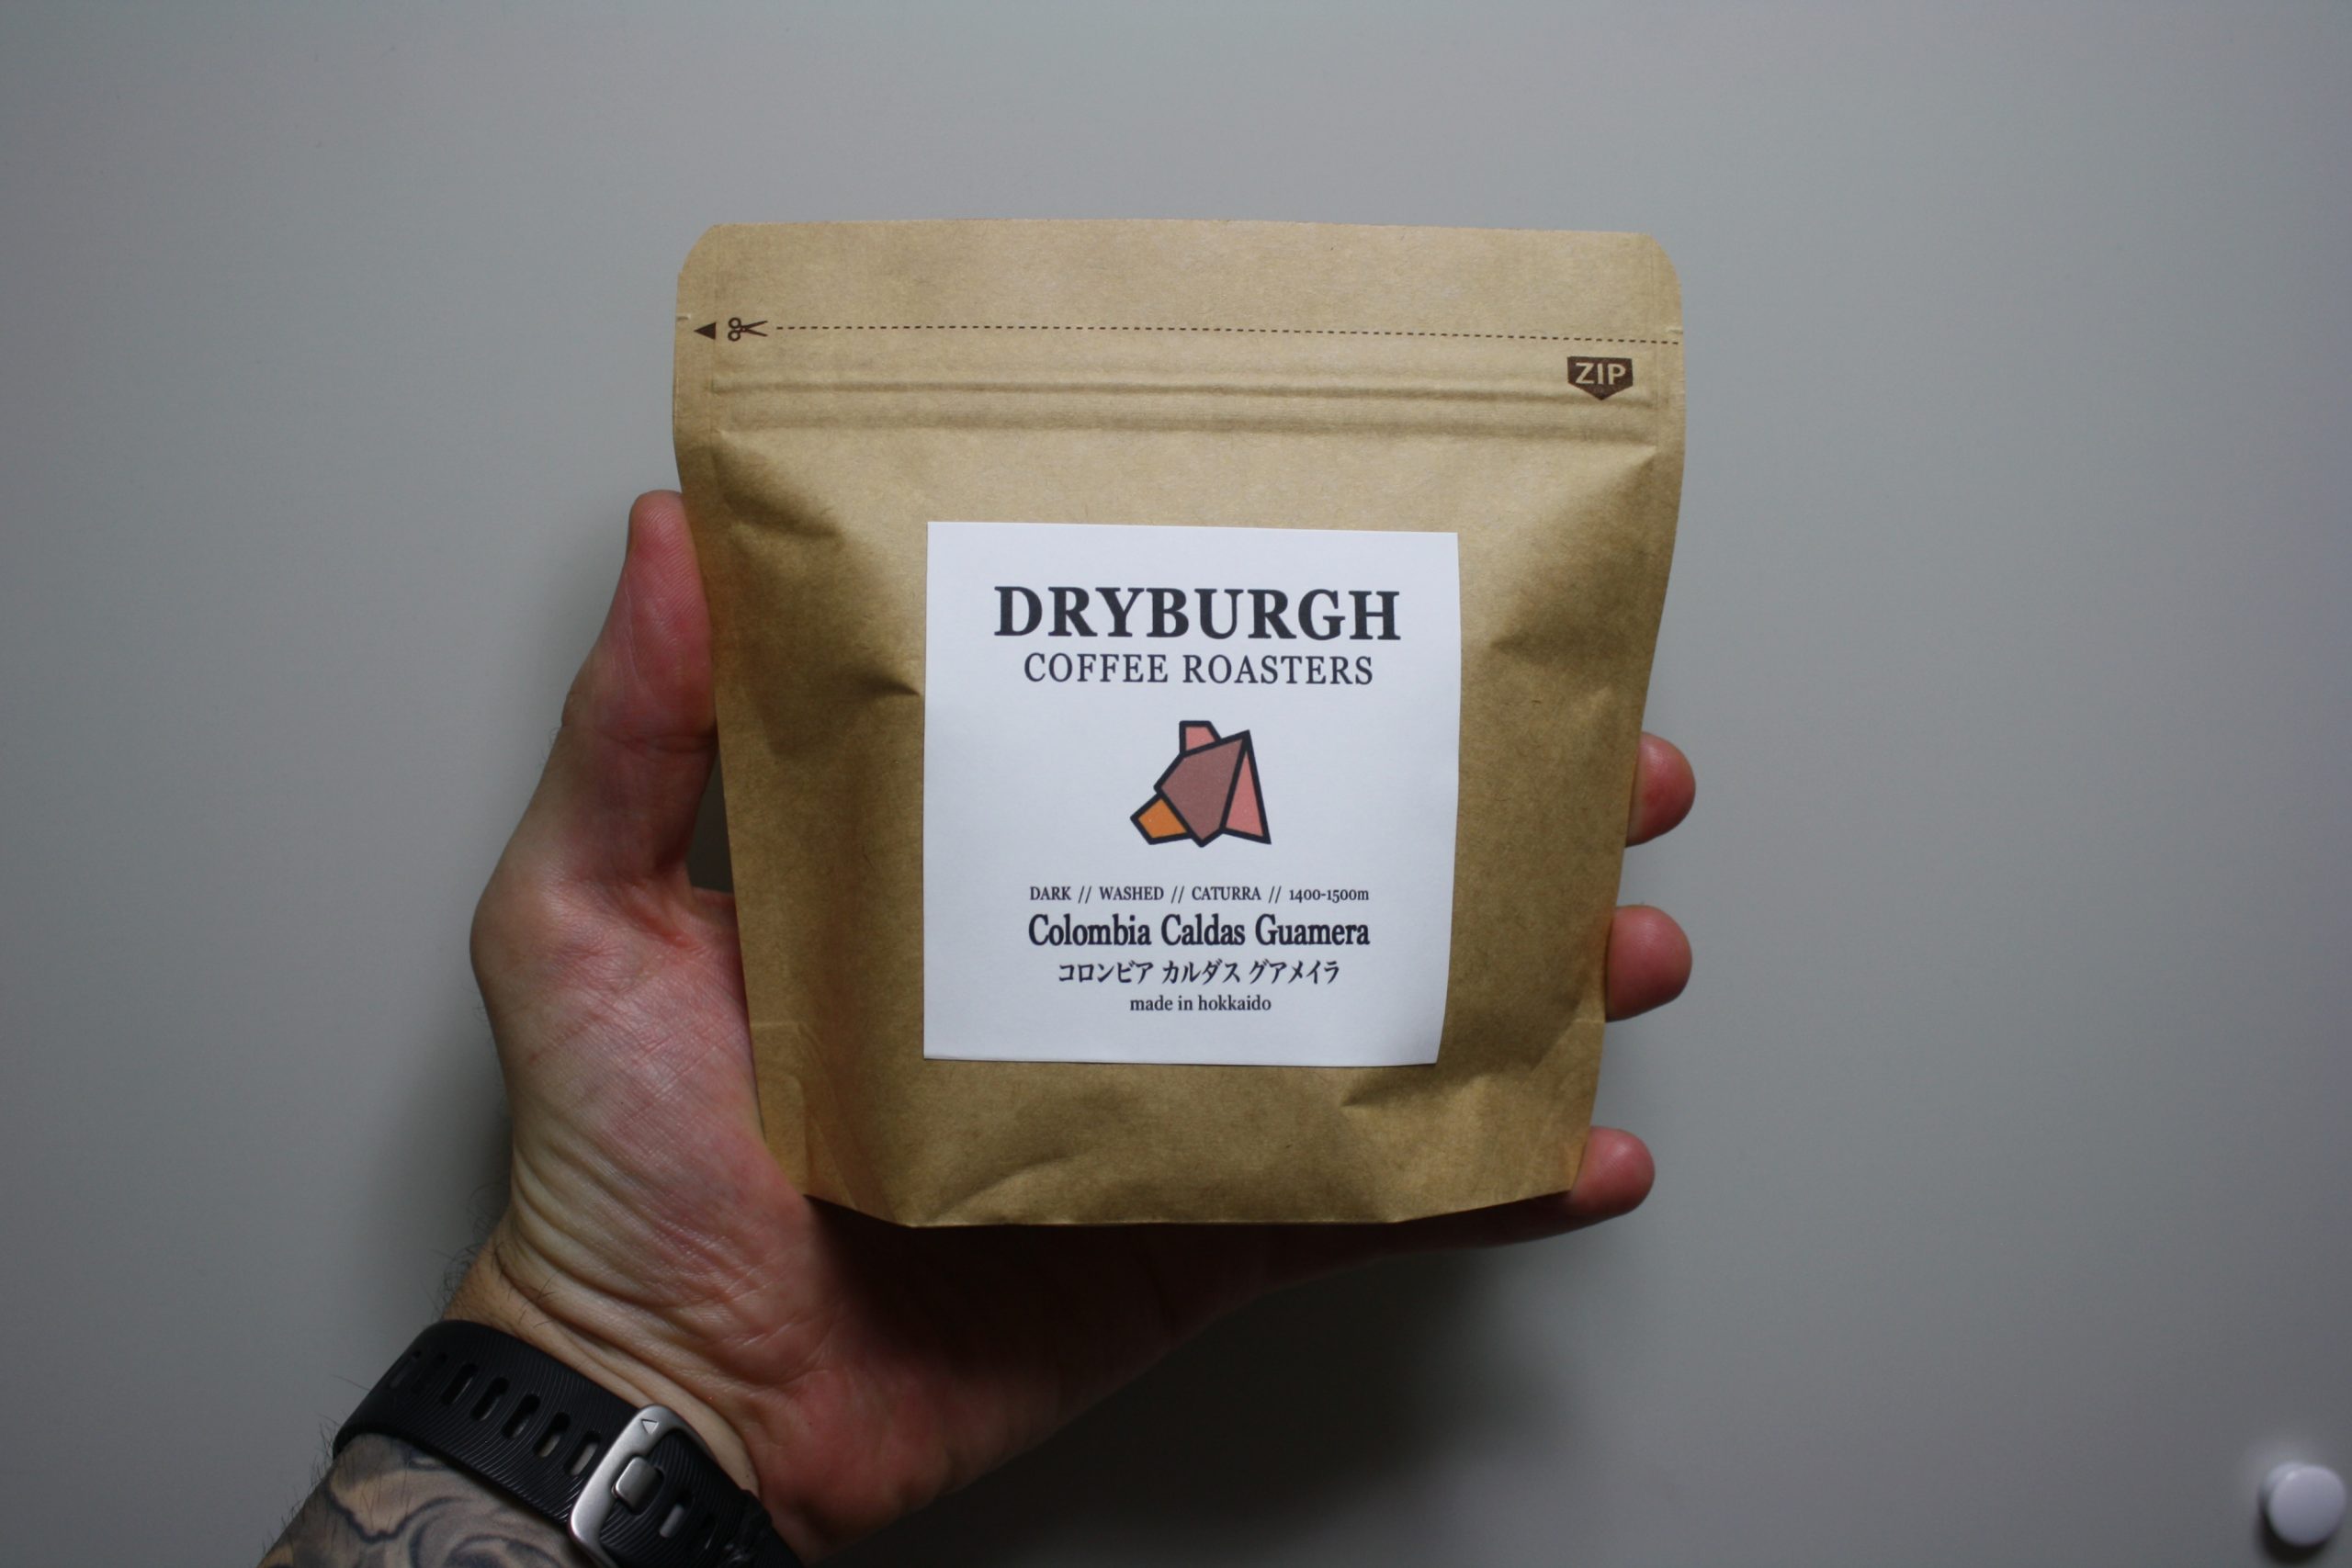 August Special カルダス グアメラ Dryburgh Coffee Roasters